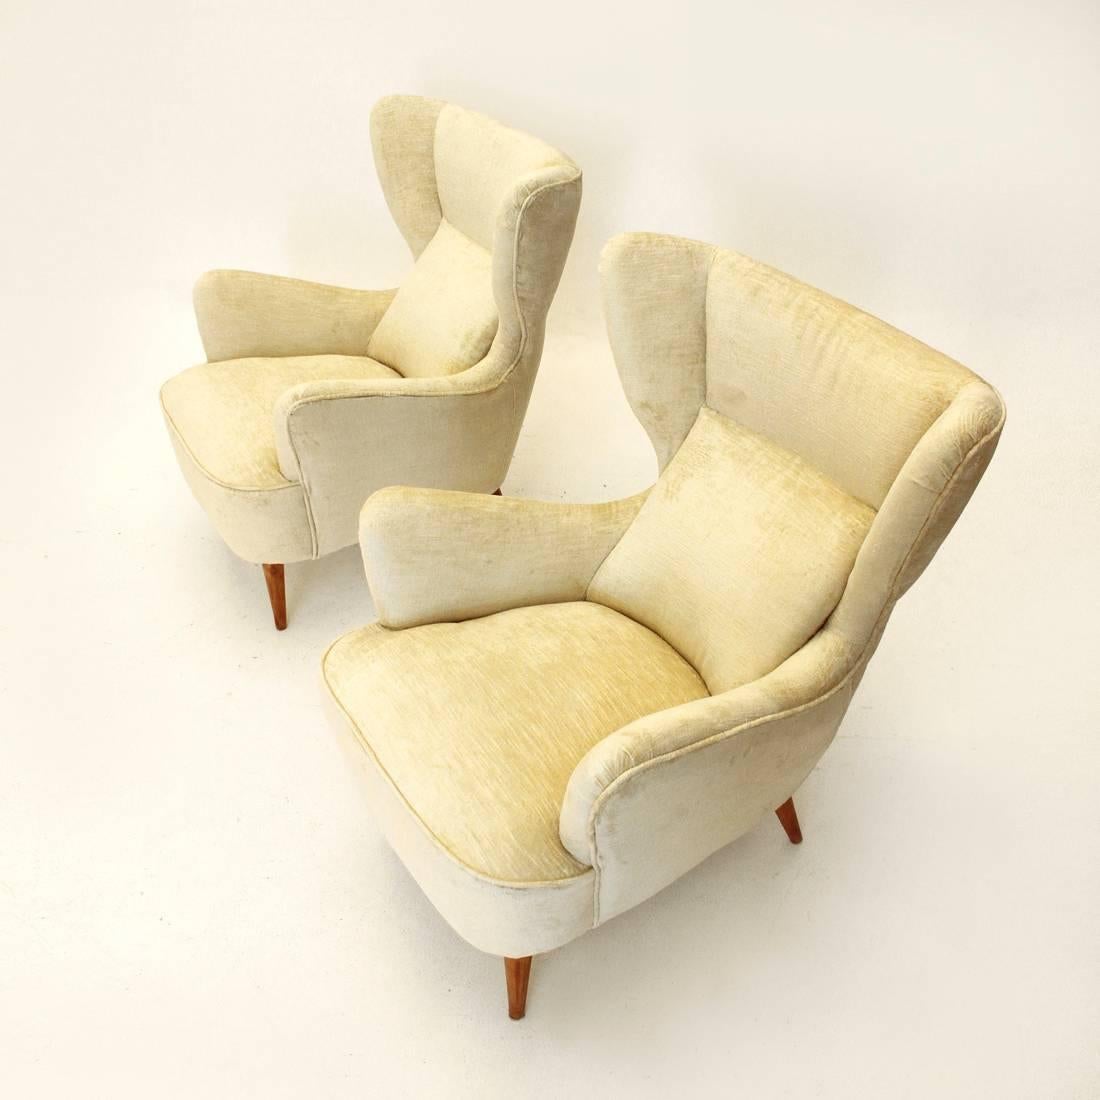 This pair of wingback armchairs was made in Italy in the 1950s. They feature wooden frames, conical legs and cream-colored velvet upholstery.